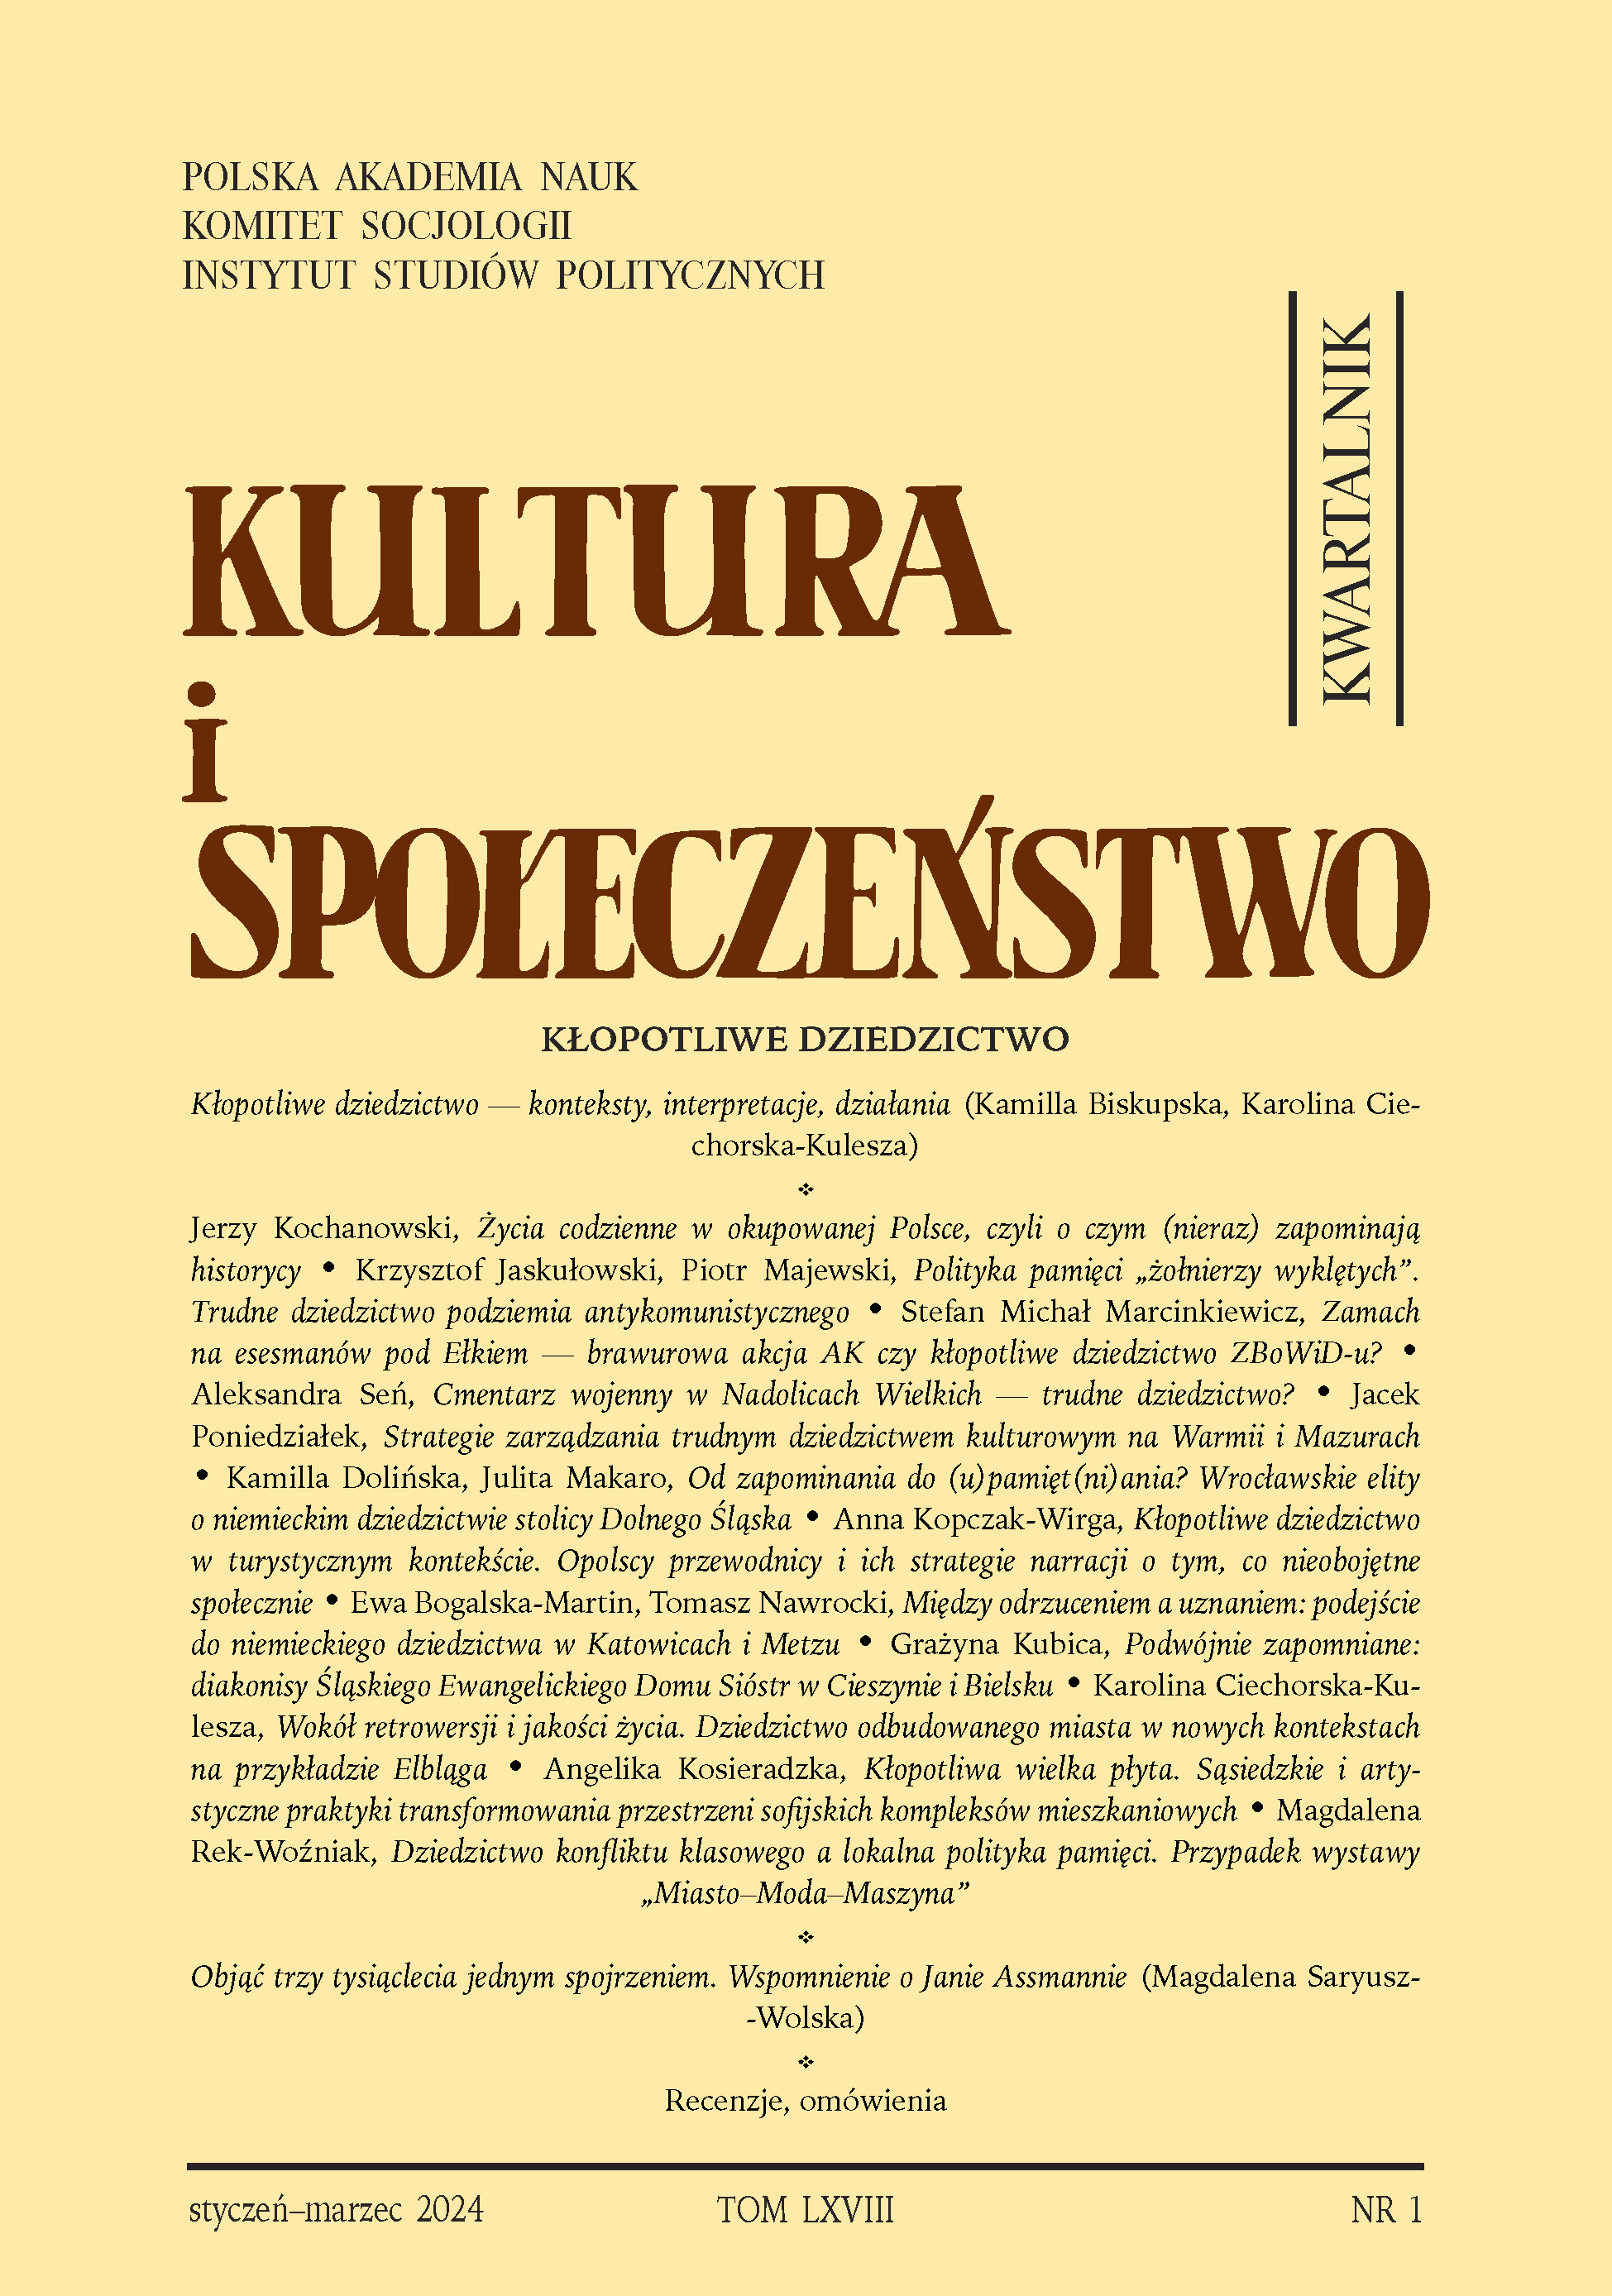 BETWEEN REJECTION AND RECOGNITION:
APPROACHES TO GERMAN HERITAGE IN KATOWICE AND METZ Cover Image